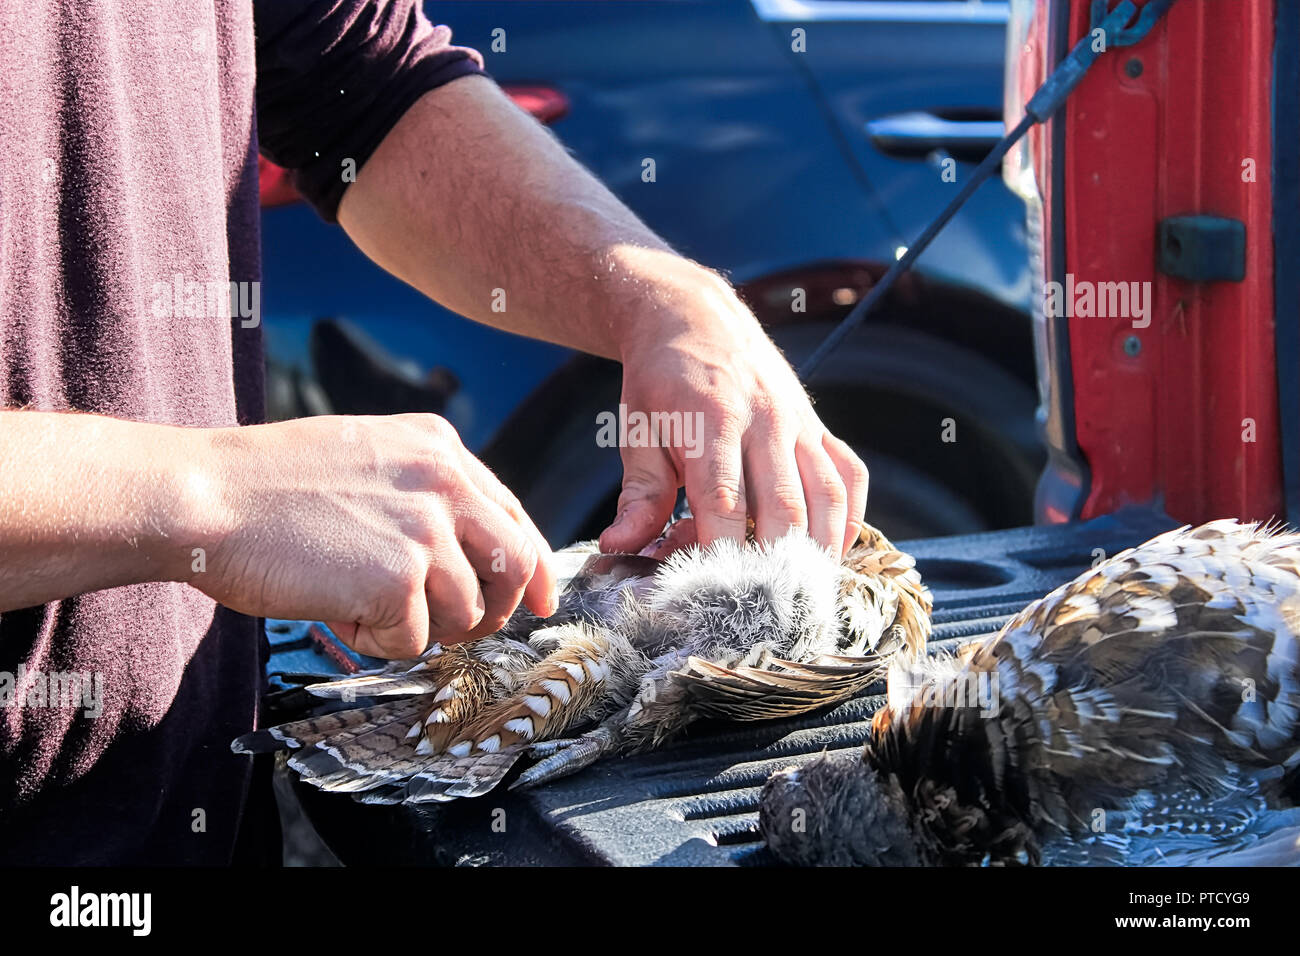 Cleaning wild chickens on the back of a truck Stock Photo